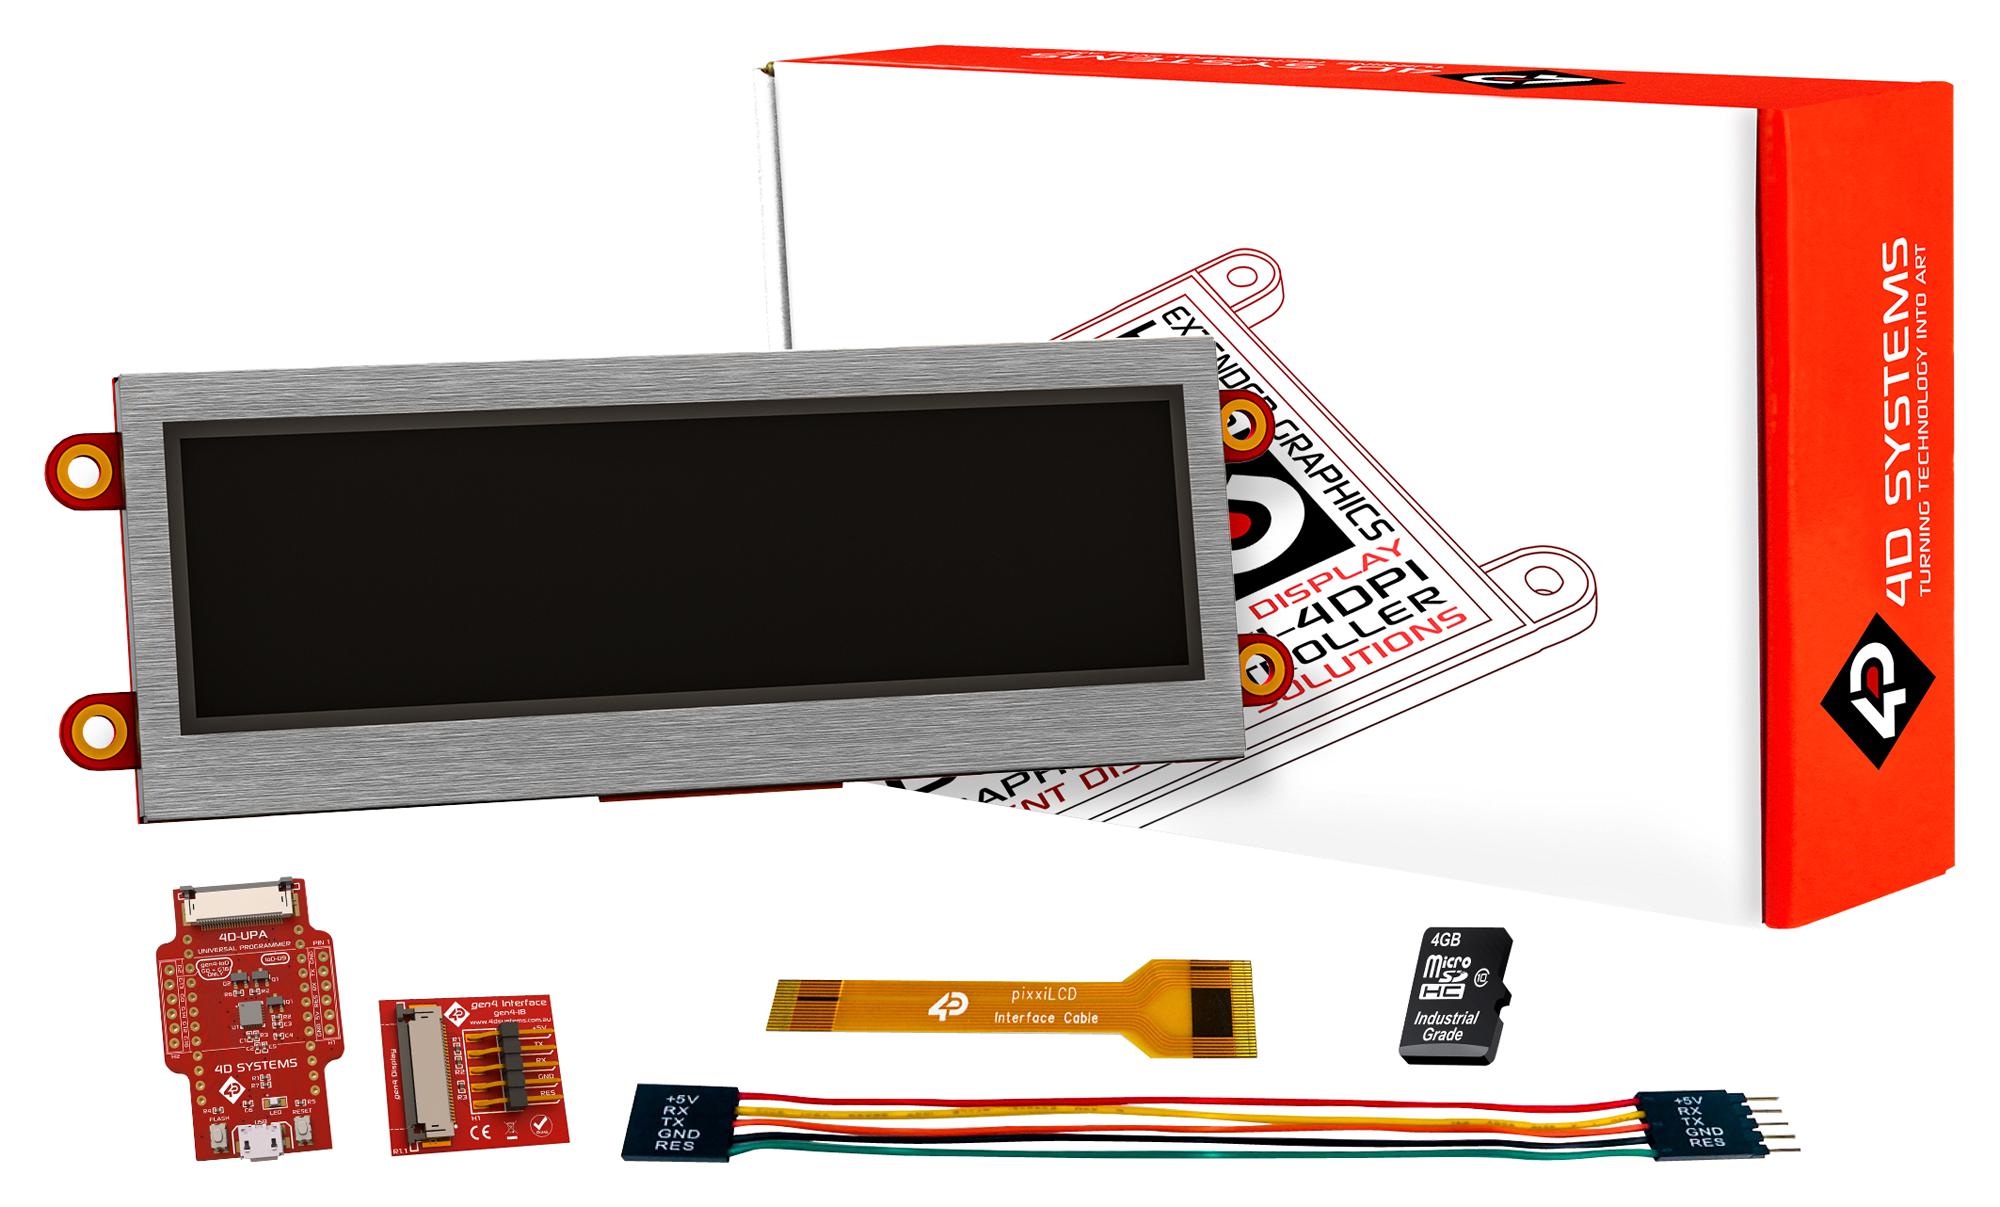 SK-PIXXILCD-39P4 STARTER KIT, 3.9" GRAPHIC DISPLAY 4D SYSTEMS